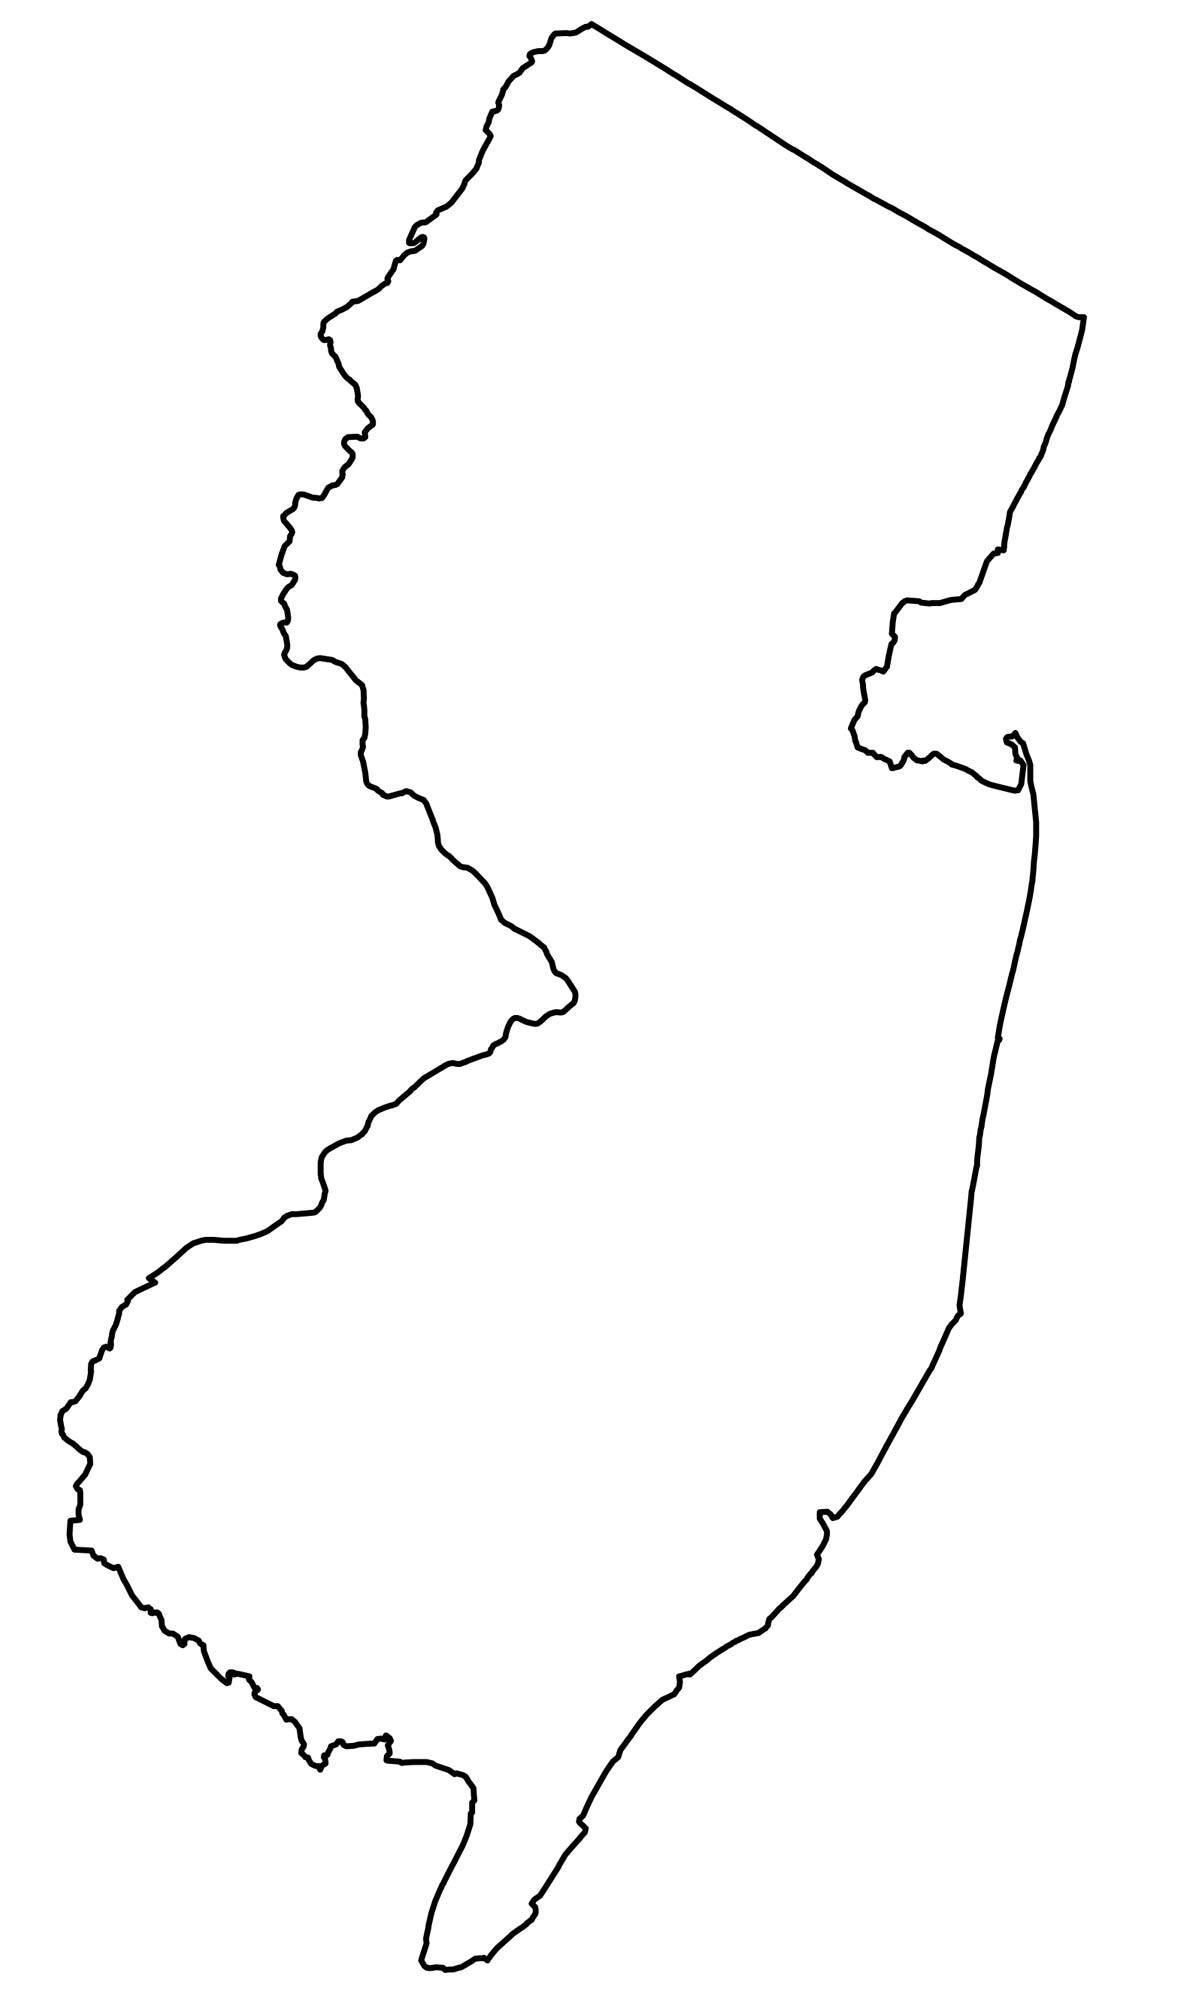 New-Jersey-Outline-Map.jpg